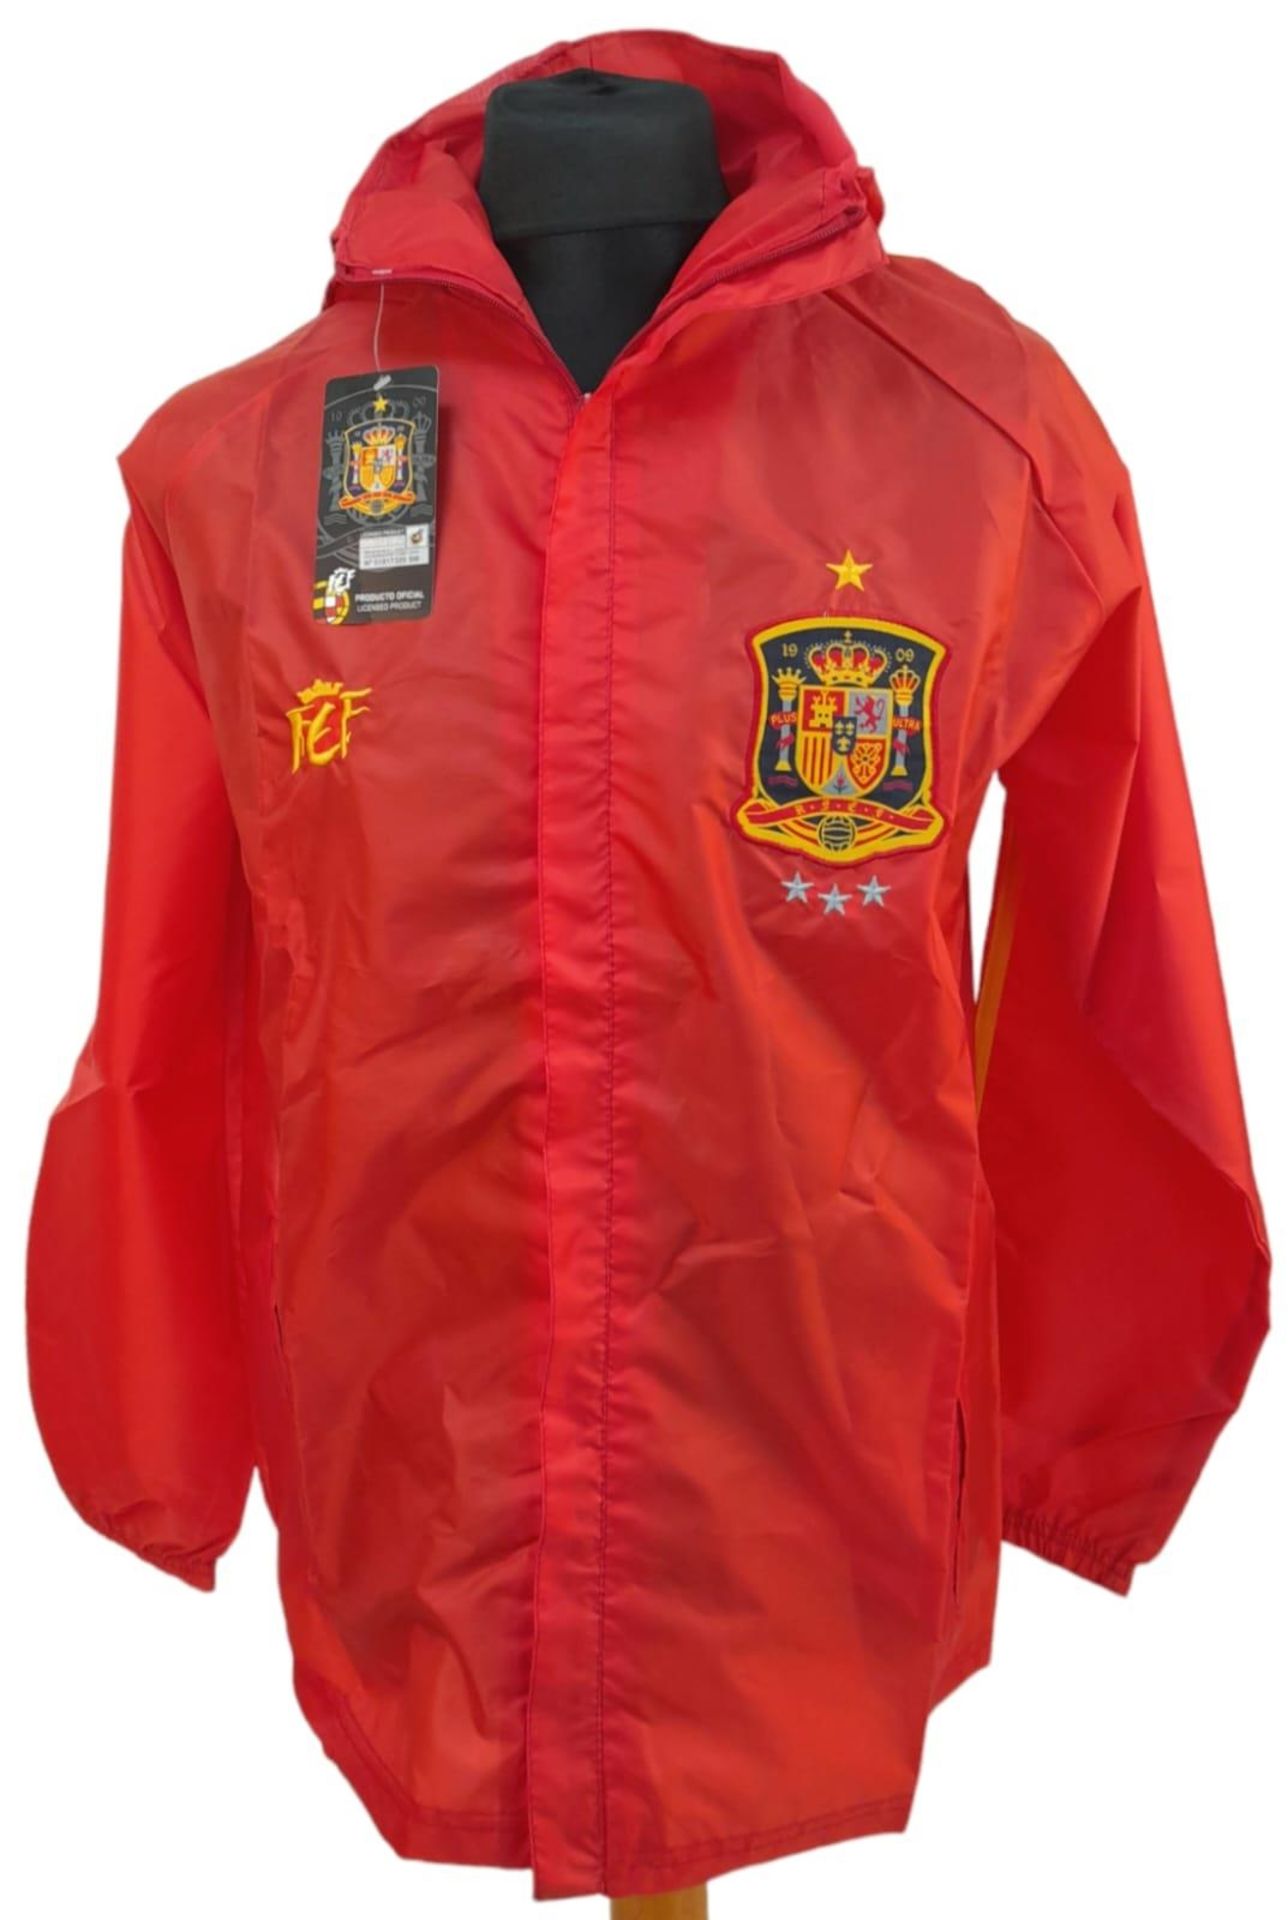 A Spain National Football Team Windbreaker Jacket (licensed). As new with tag. XL